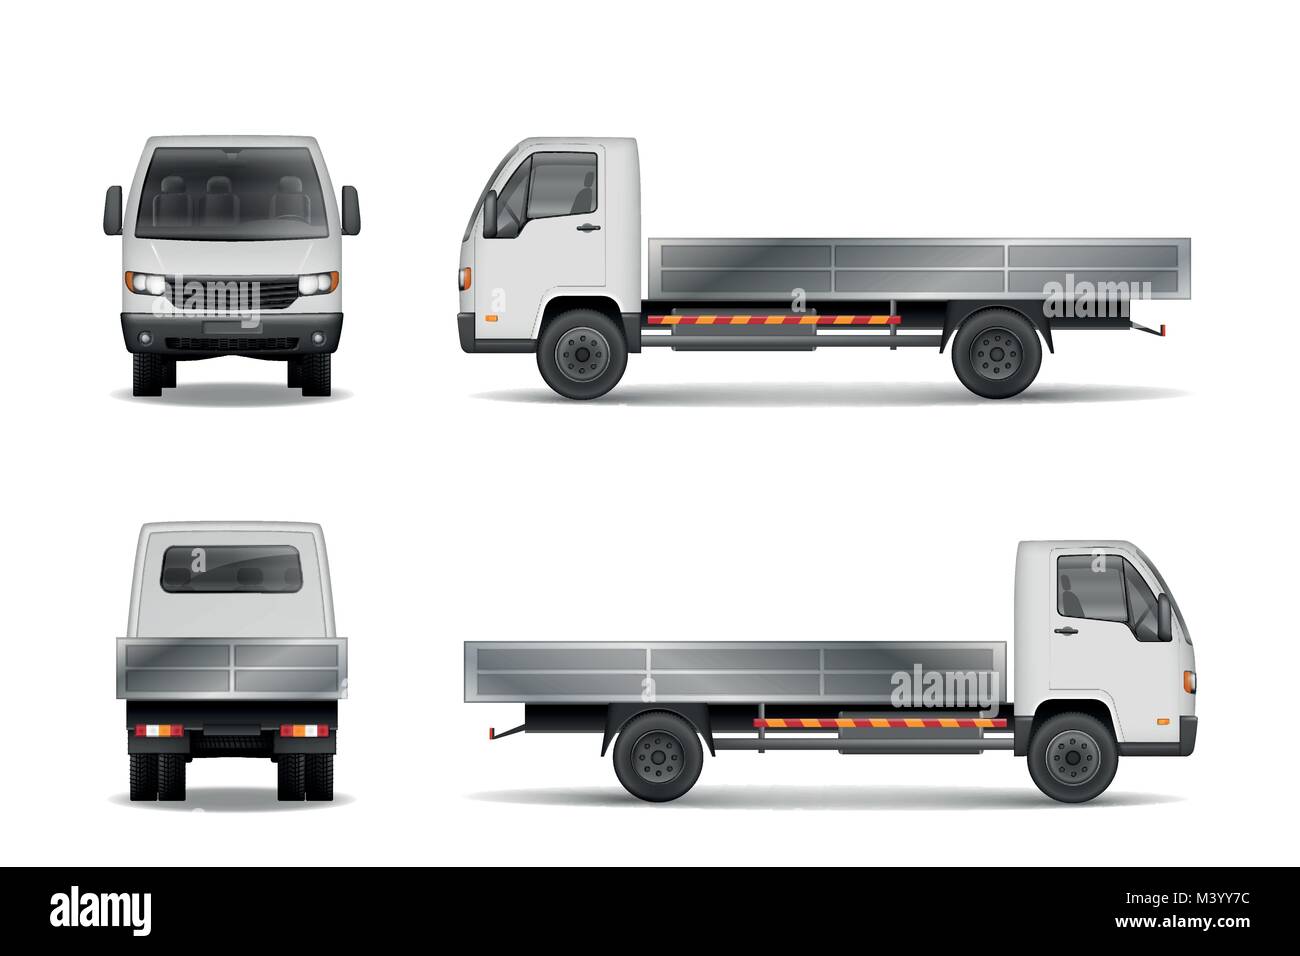 White realistic delivery cargo truck isolated on white. City commercial lorry mockup from side, front and rear view. Vector illustration. Stock Vector